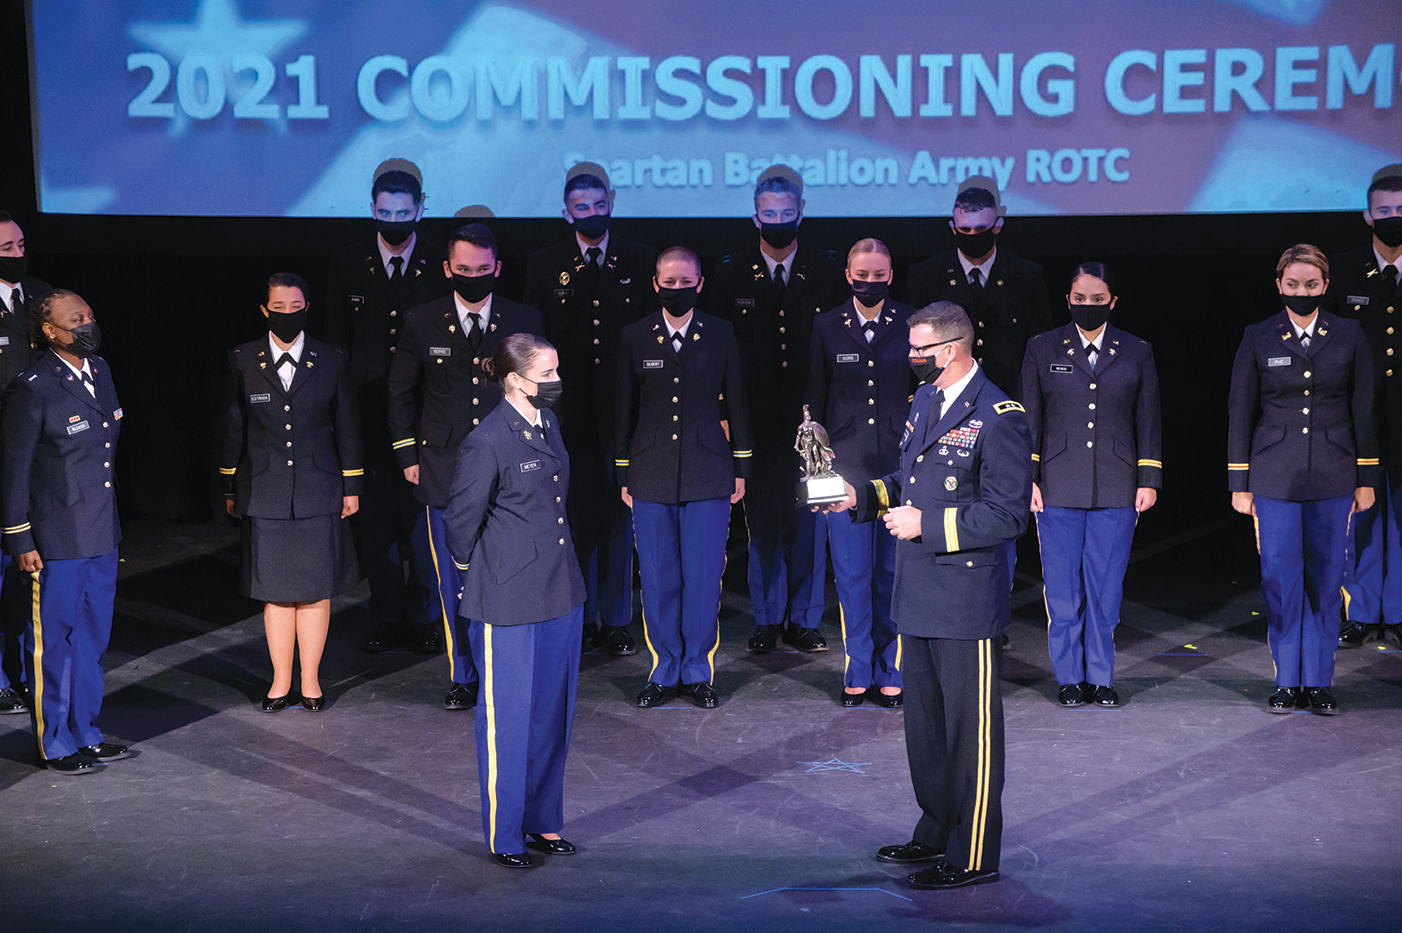 Maj. Gen. Jeffrey Drushal ’89 receives the Spartan Award 2nd Lt. Adelle Meyer ’21 at the 2021 commissioning ceremony for UT’s ROTC program in May